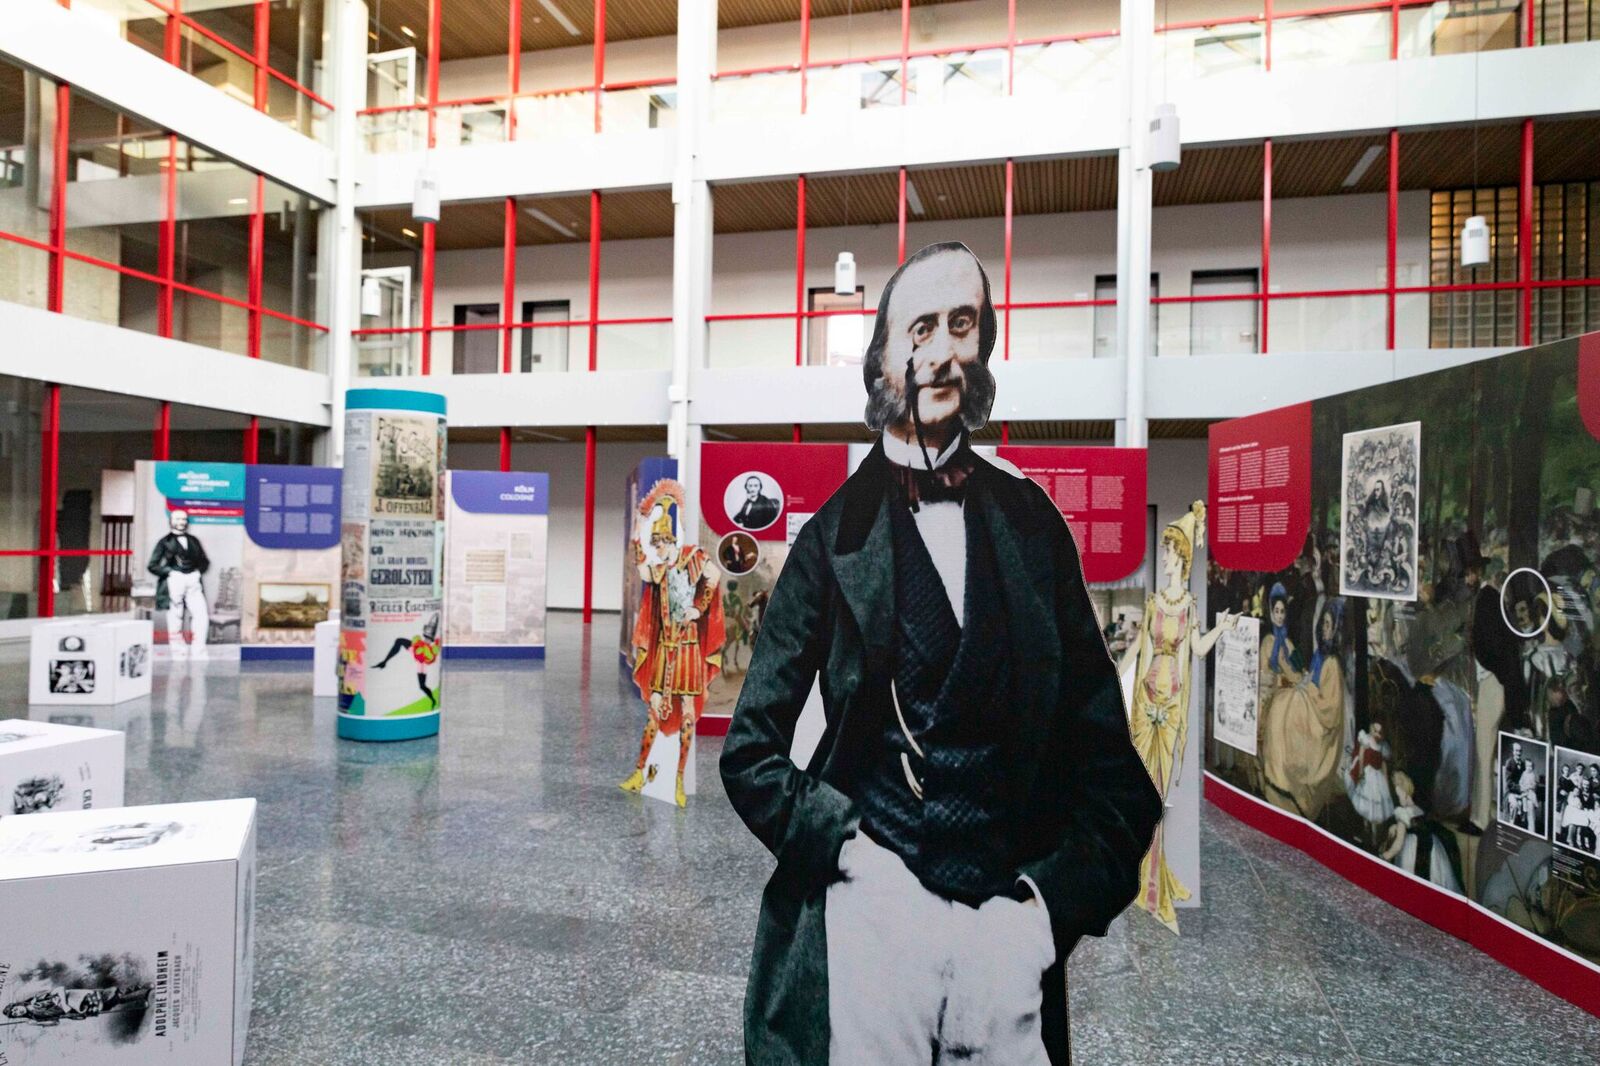 The Jacques Offenbach exhibition in Cologne. (Photo: Urban Media Project)